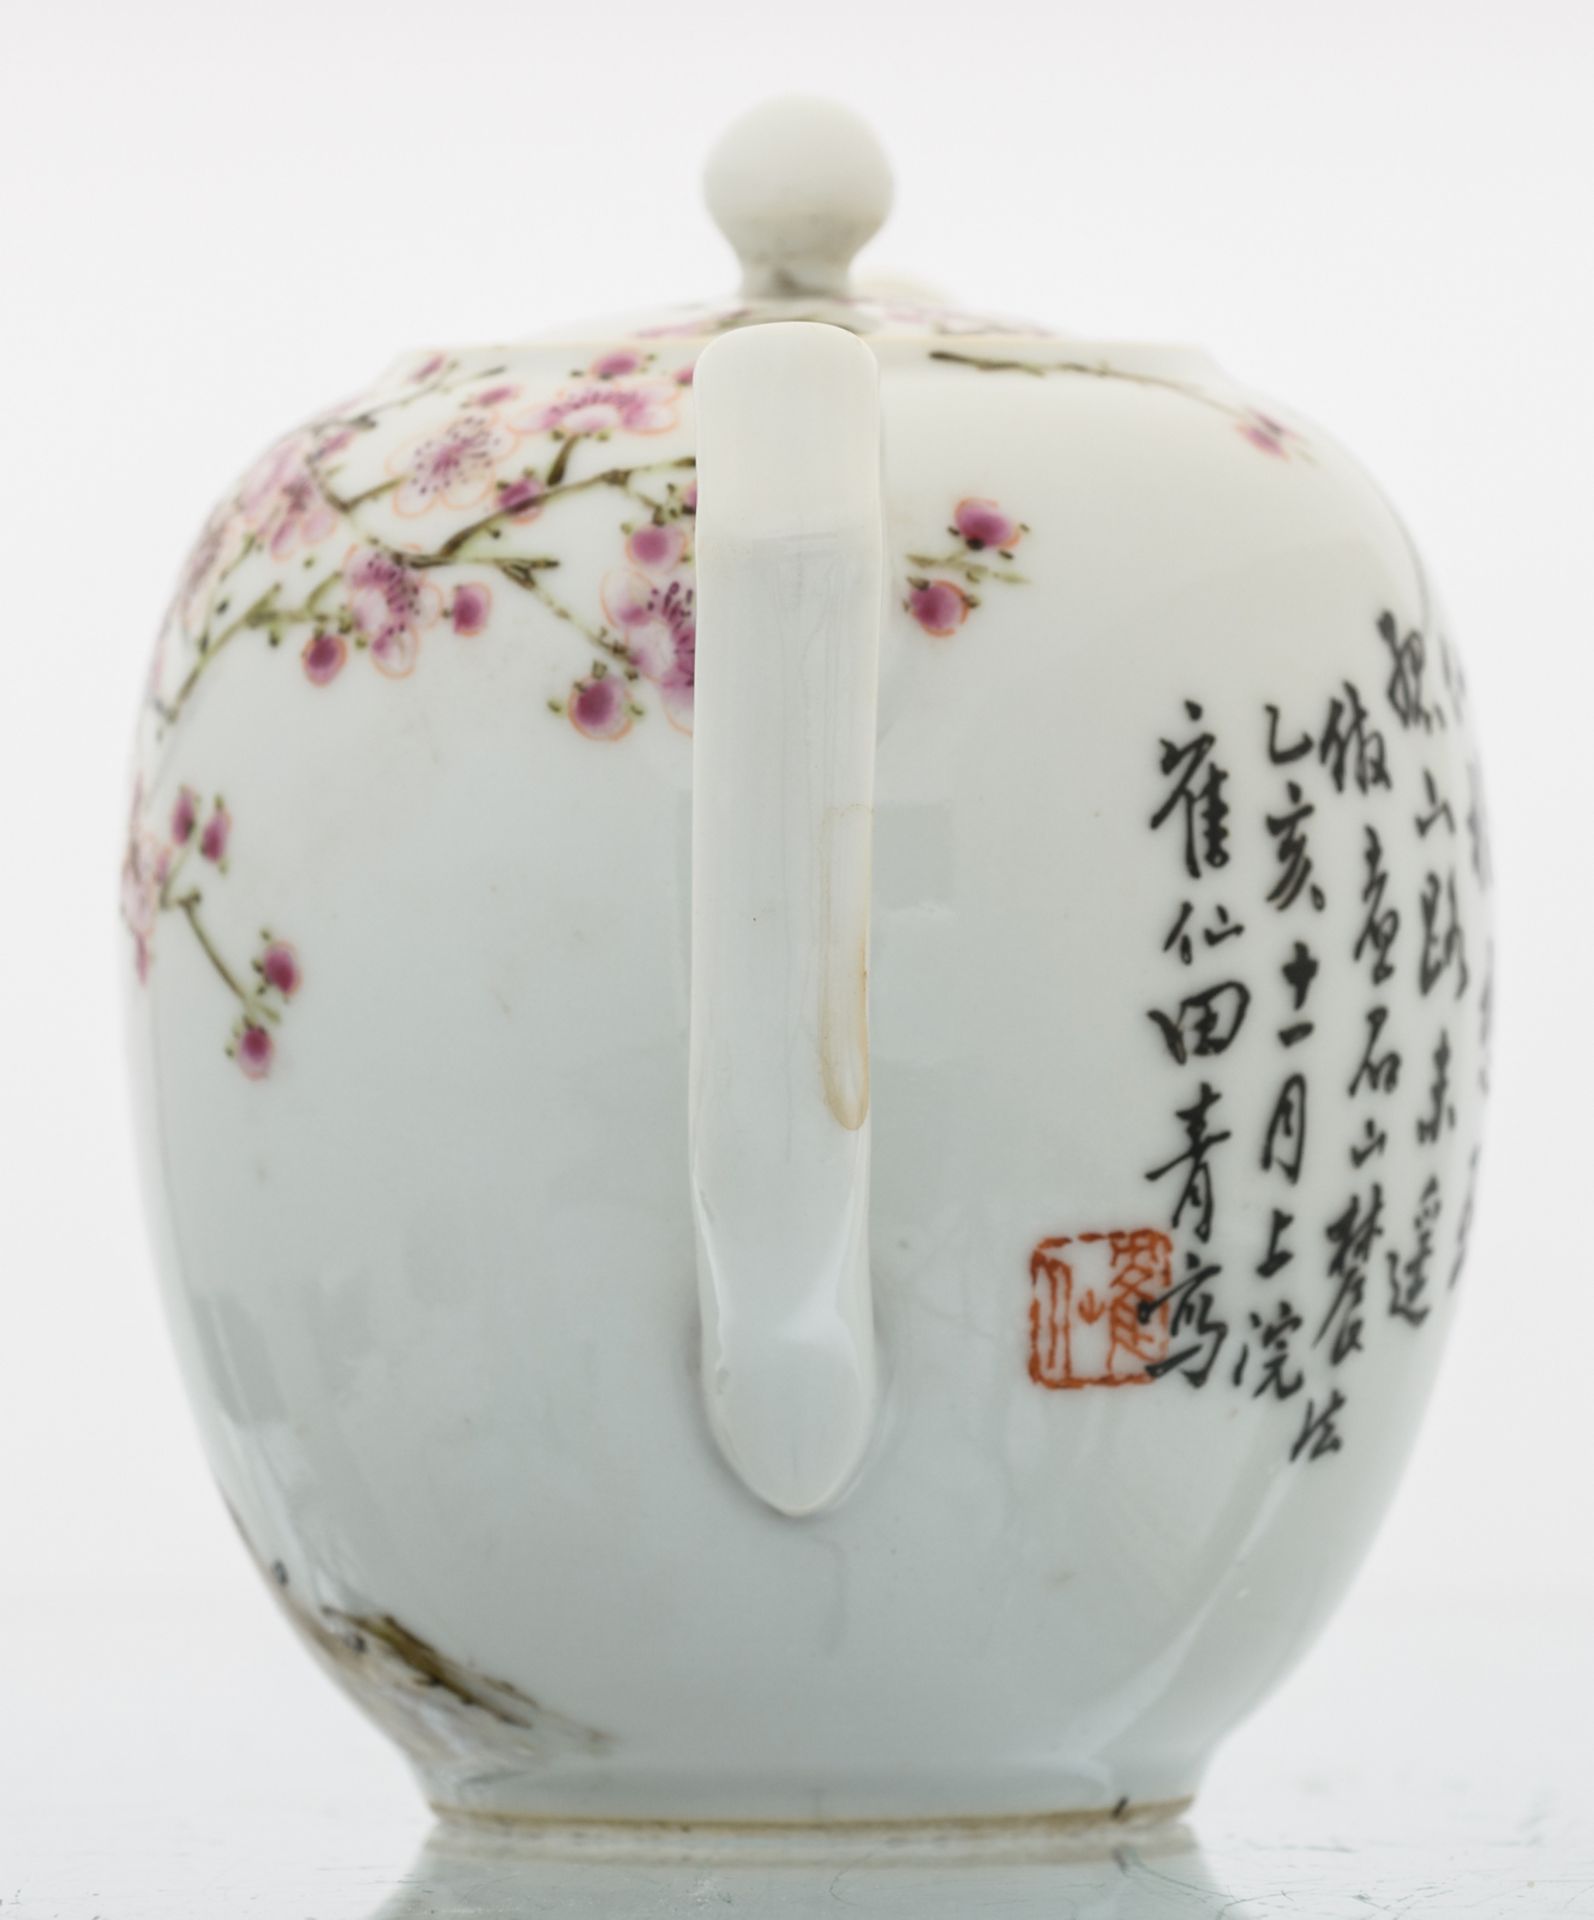 A Chinese famille rose teapot and cover, decorated with cherry blossoms and a calligraphic text, - Image 2 of 8